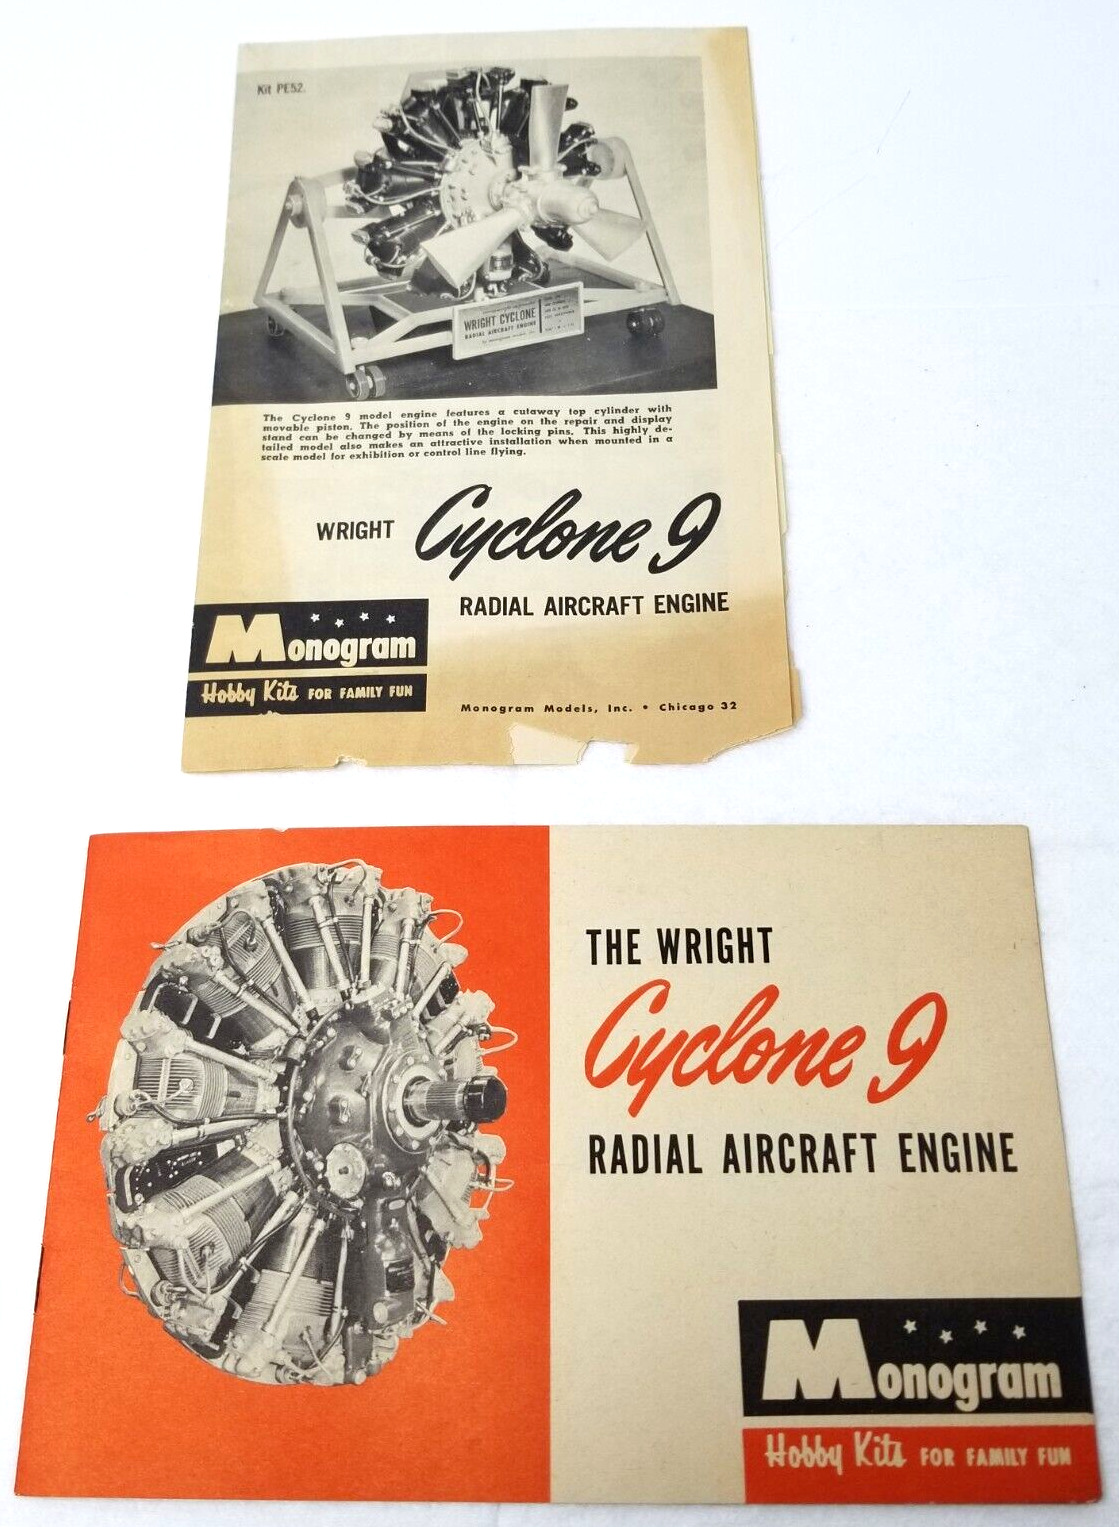 The Wright Cyclone 9 Radial Aircraft Engine Manual Sales Brochure 1959